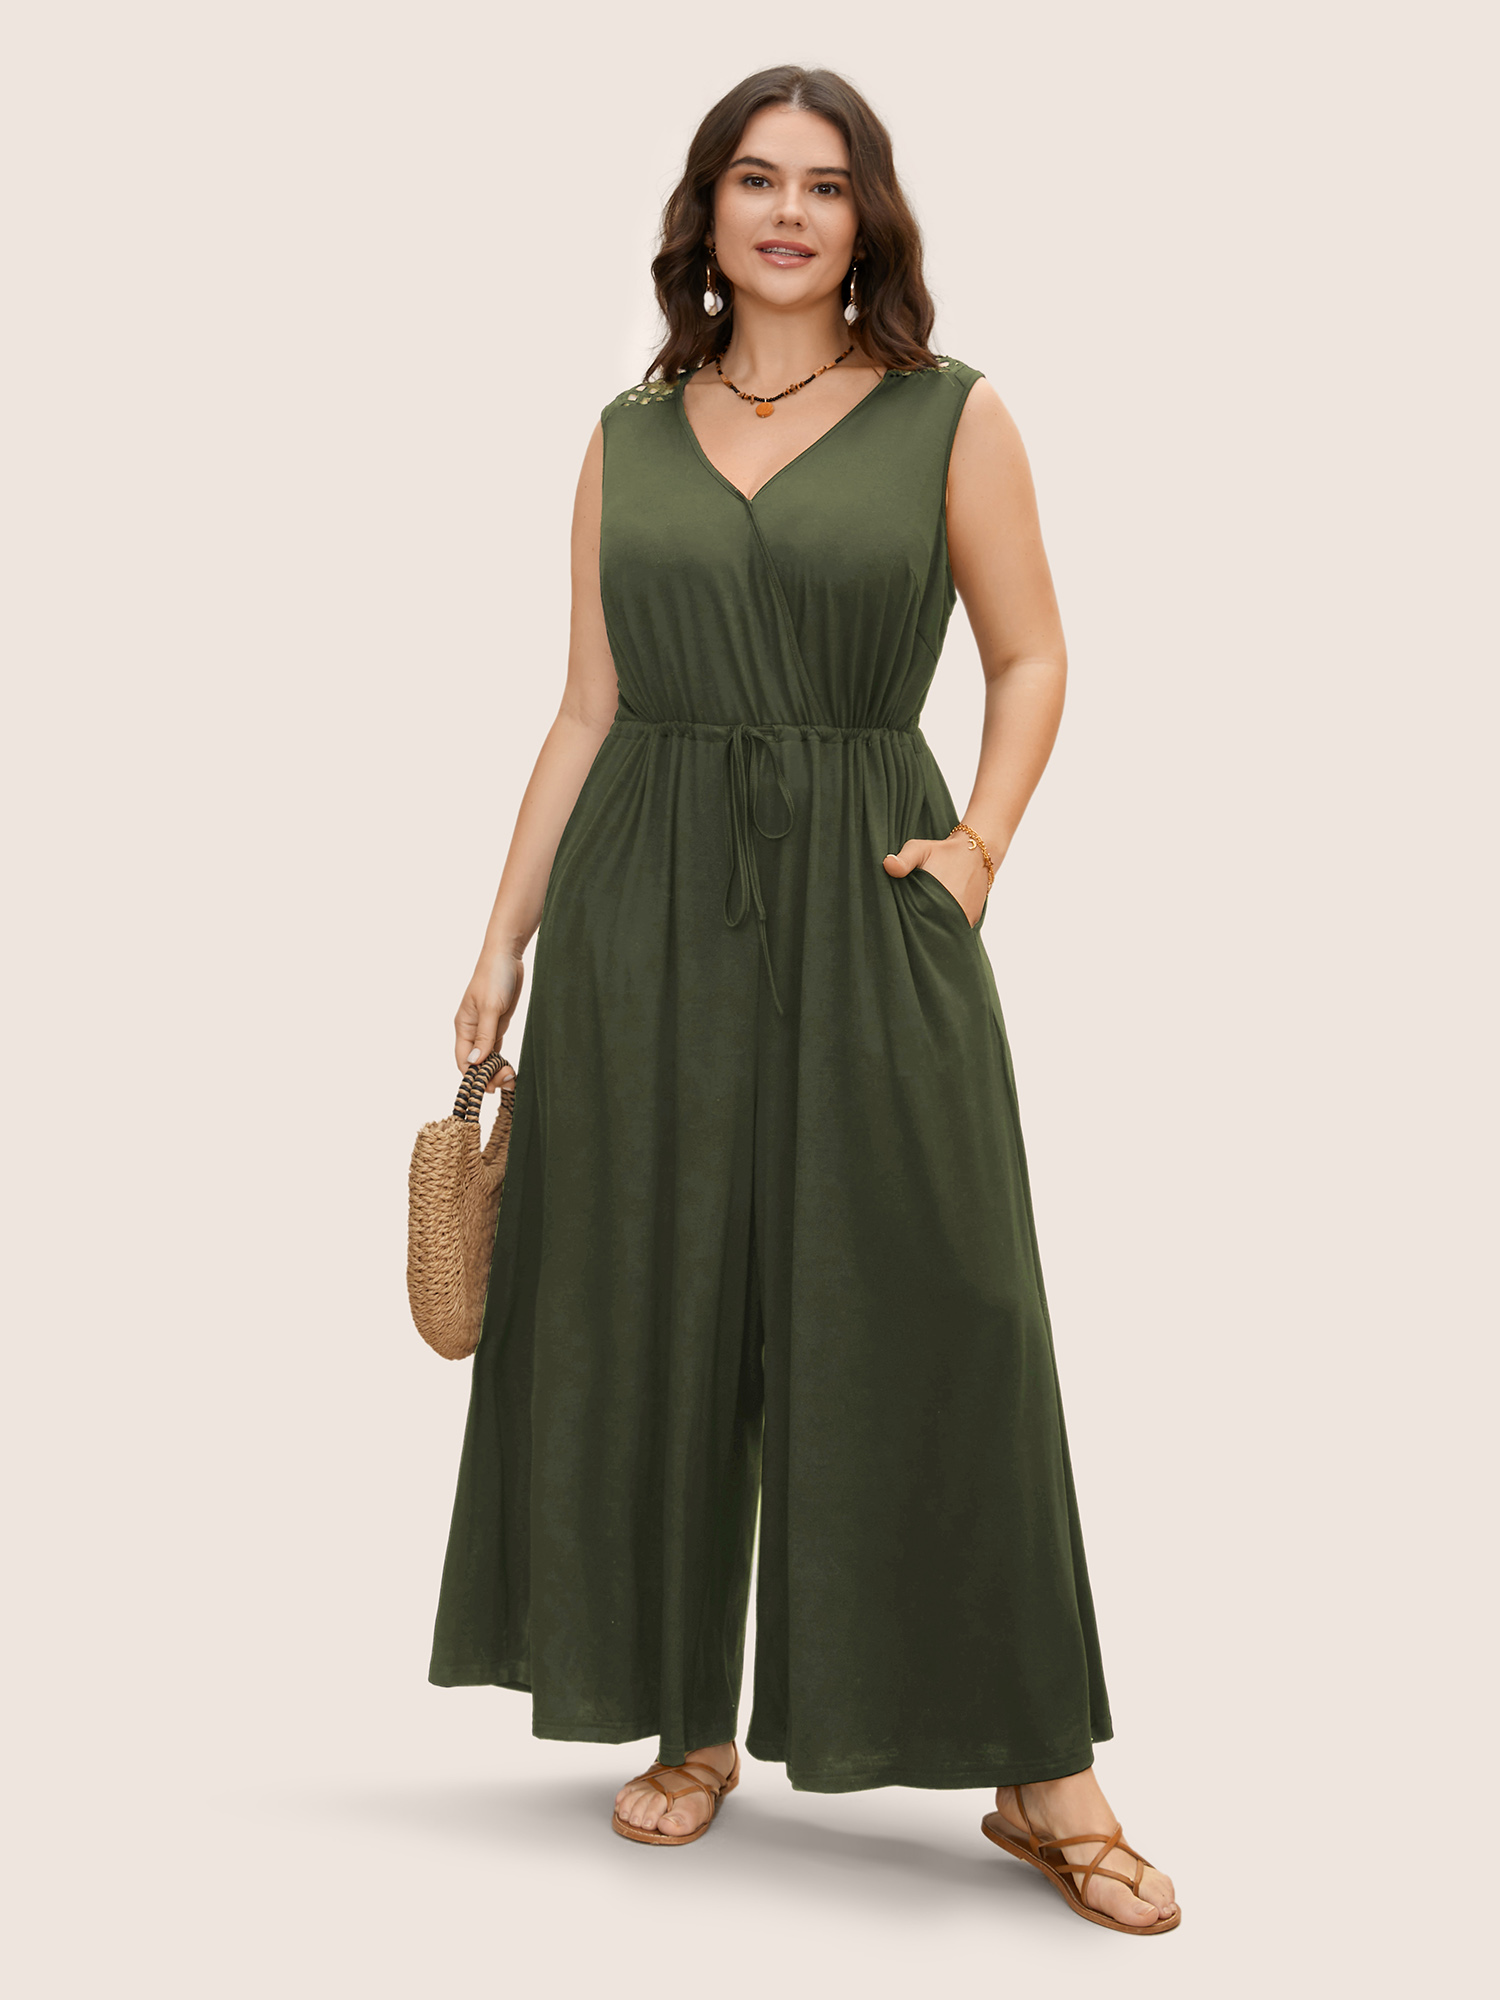 

Plus Size ArmyGreen V Neck Crocheted Cut Out Jumpsuit Women Resort Sleeveless V-neck Vacation Loose Jumpsuits BloomChic